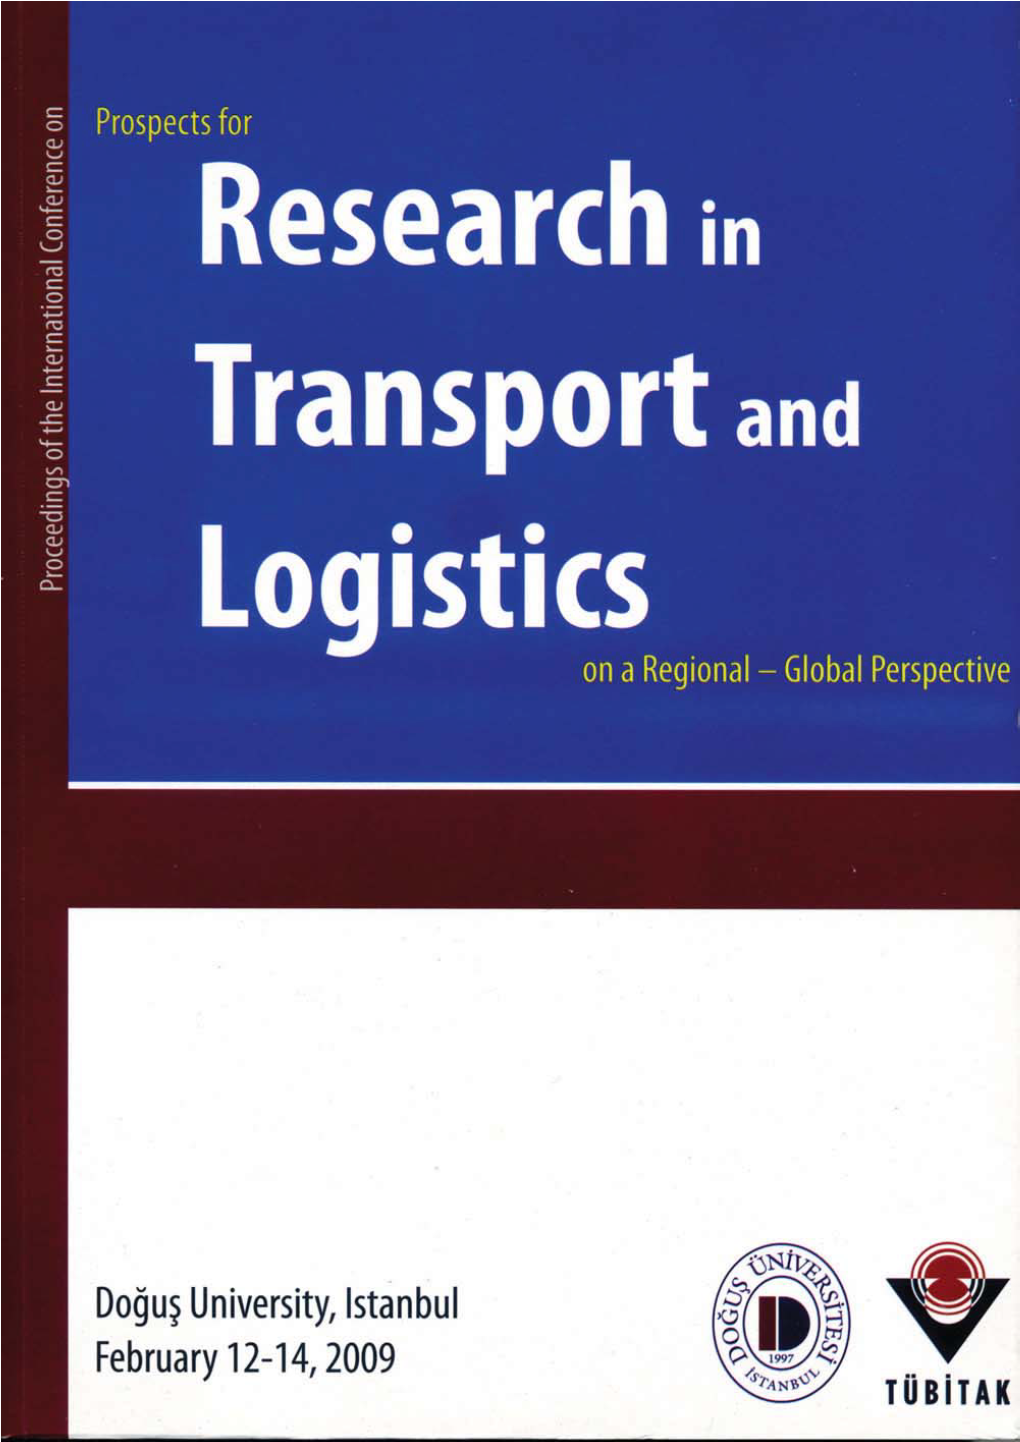 Transport and Logistics on a Regional - Global Perspective